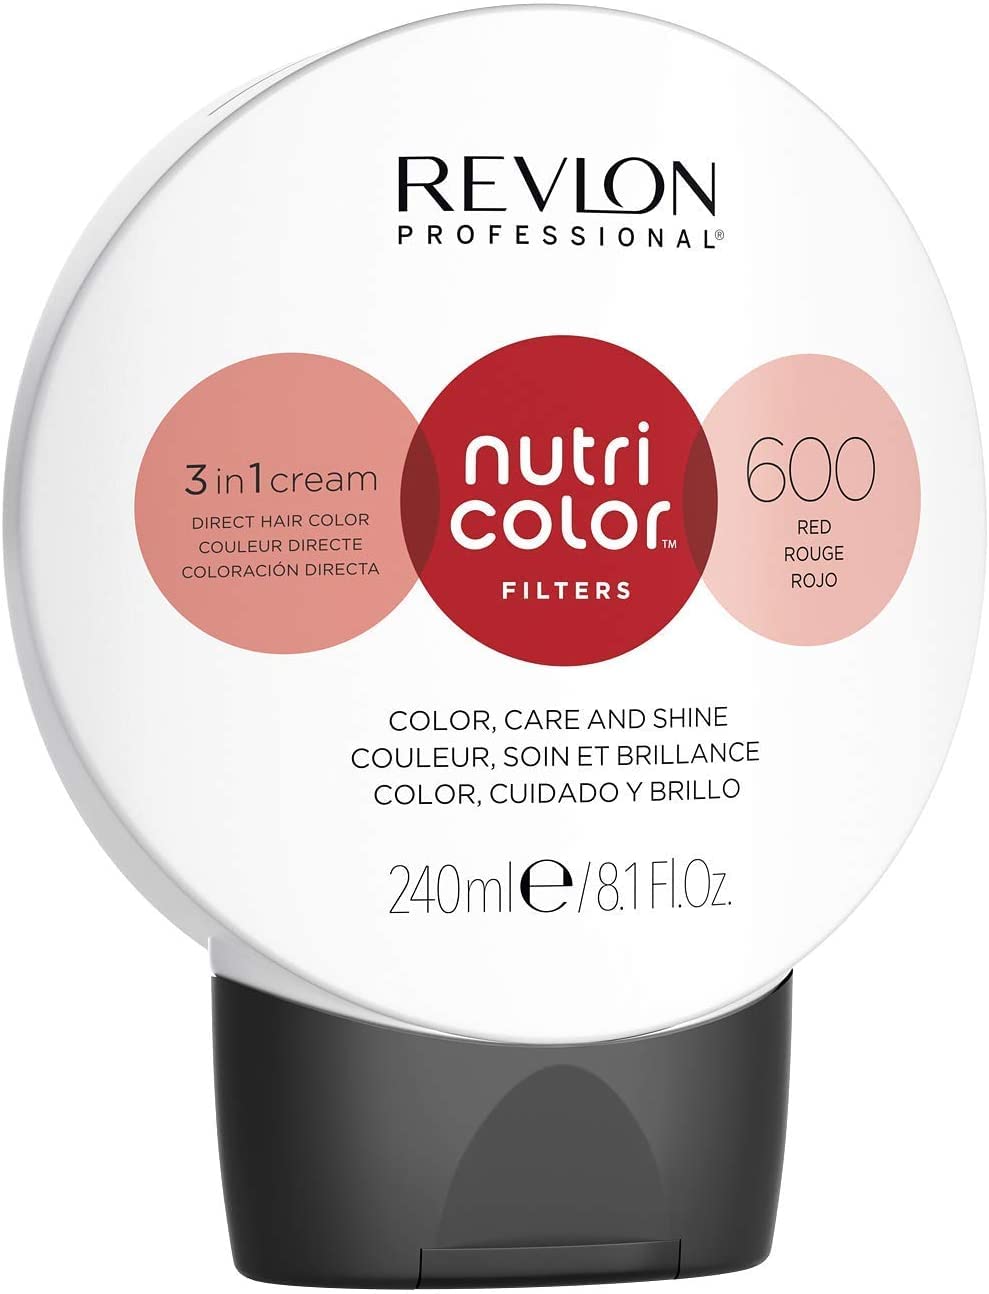 Nutri Colour Filter 600 Fire Red 240ml